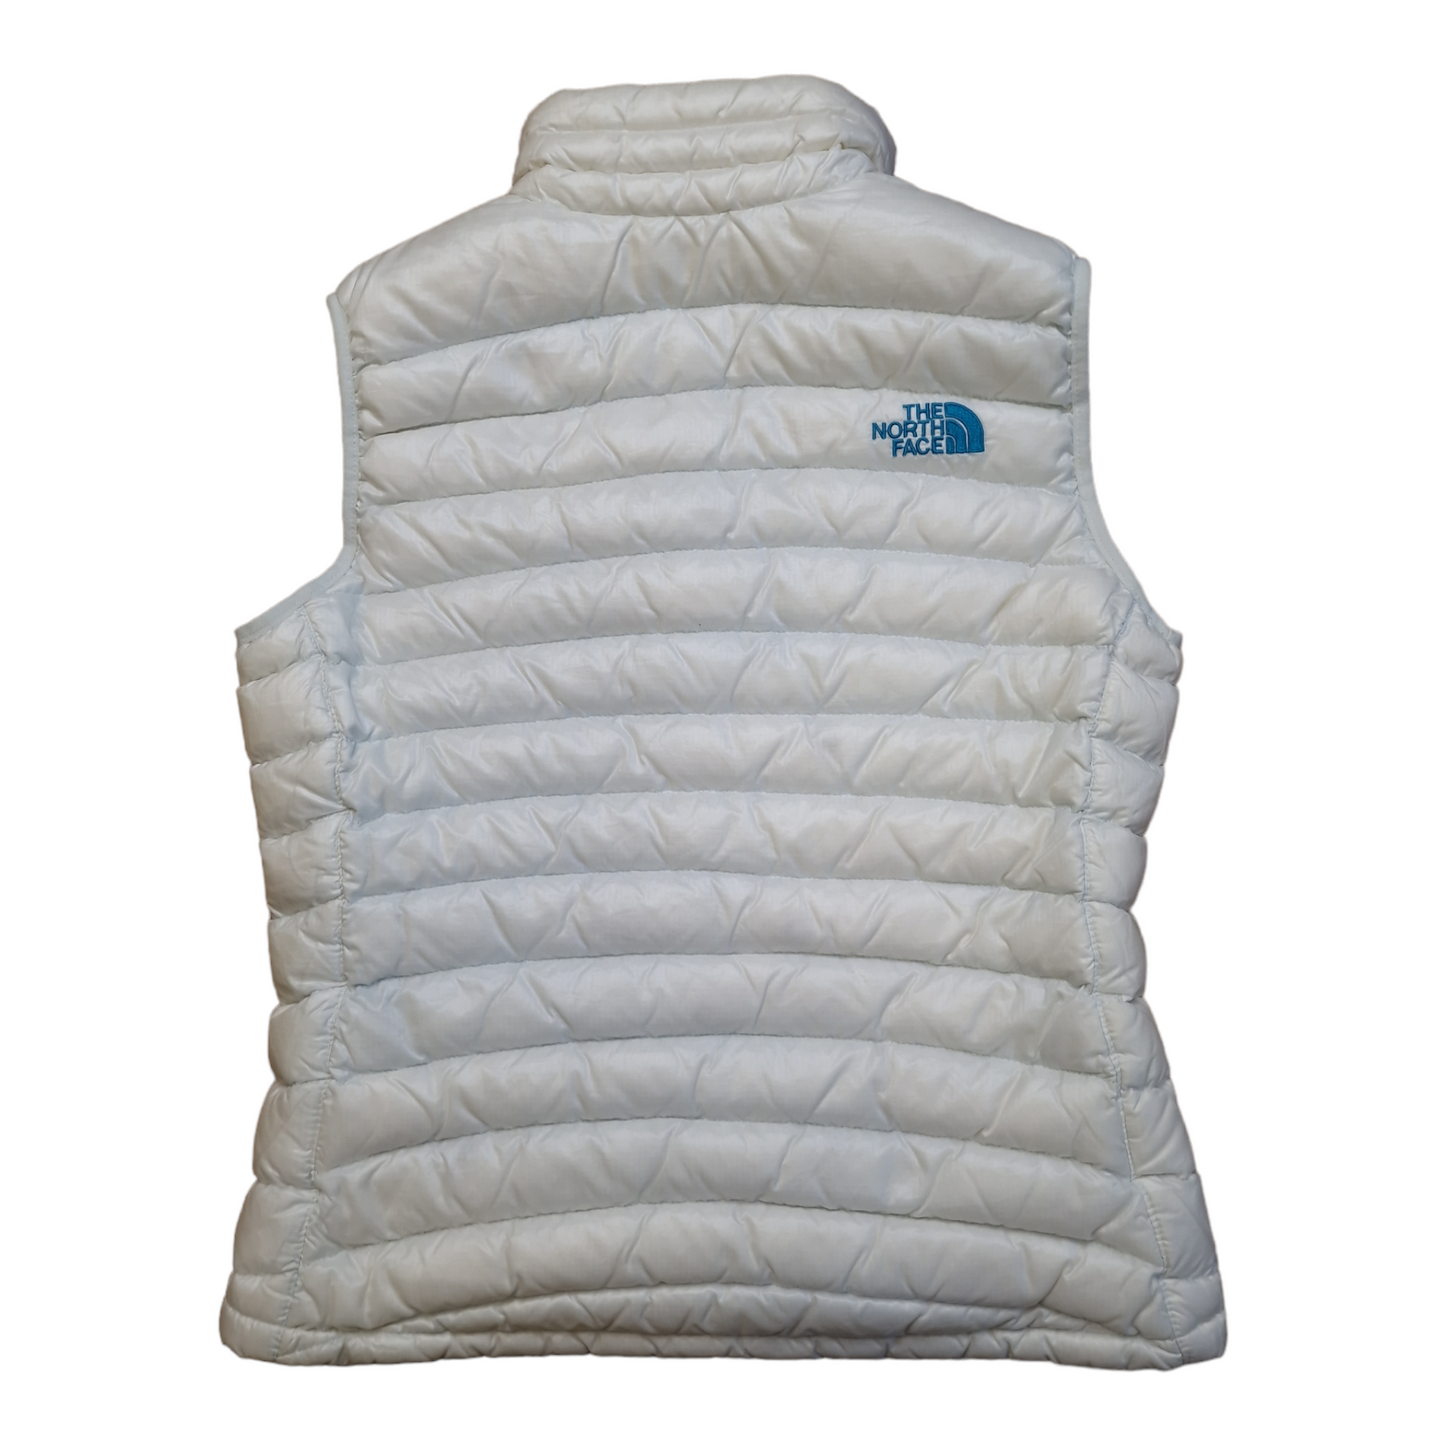 Vintage The North Face summit series gilet - Women's XS